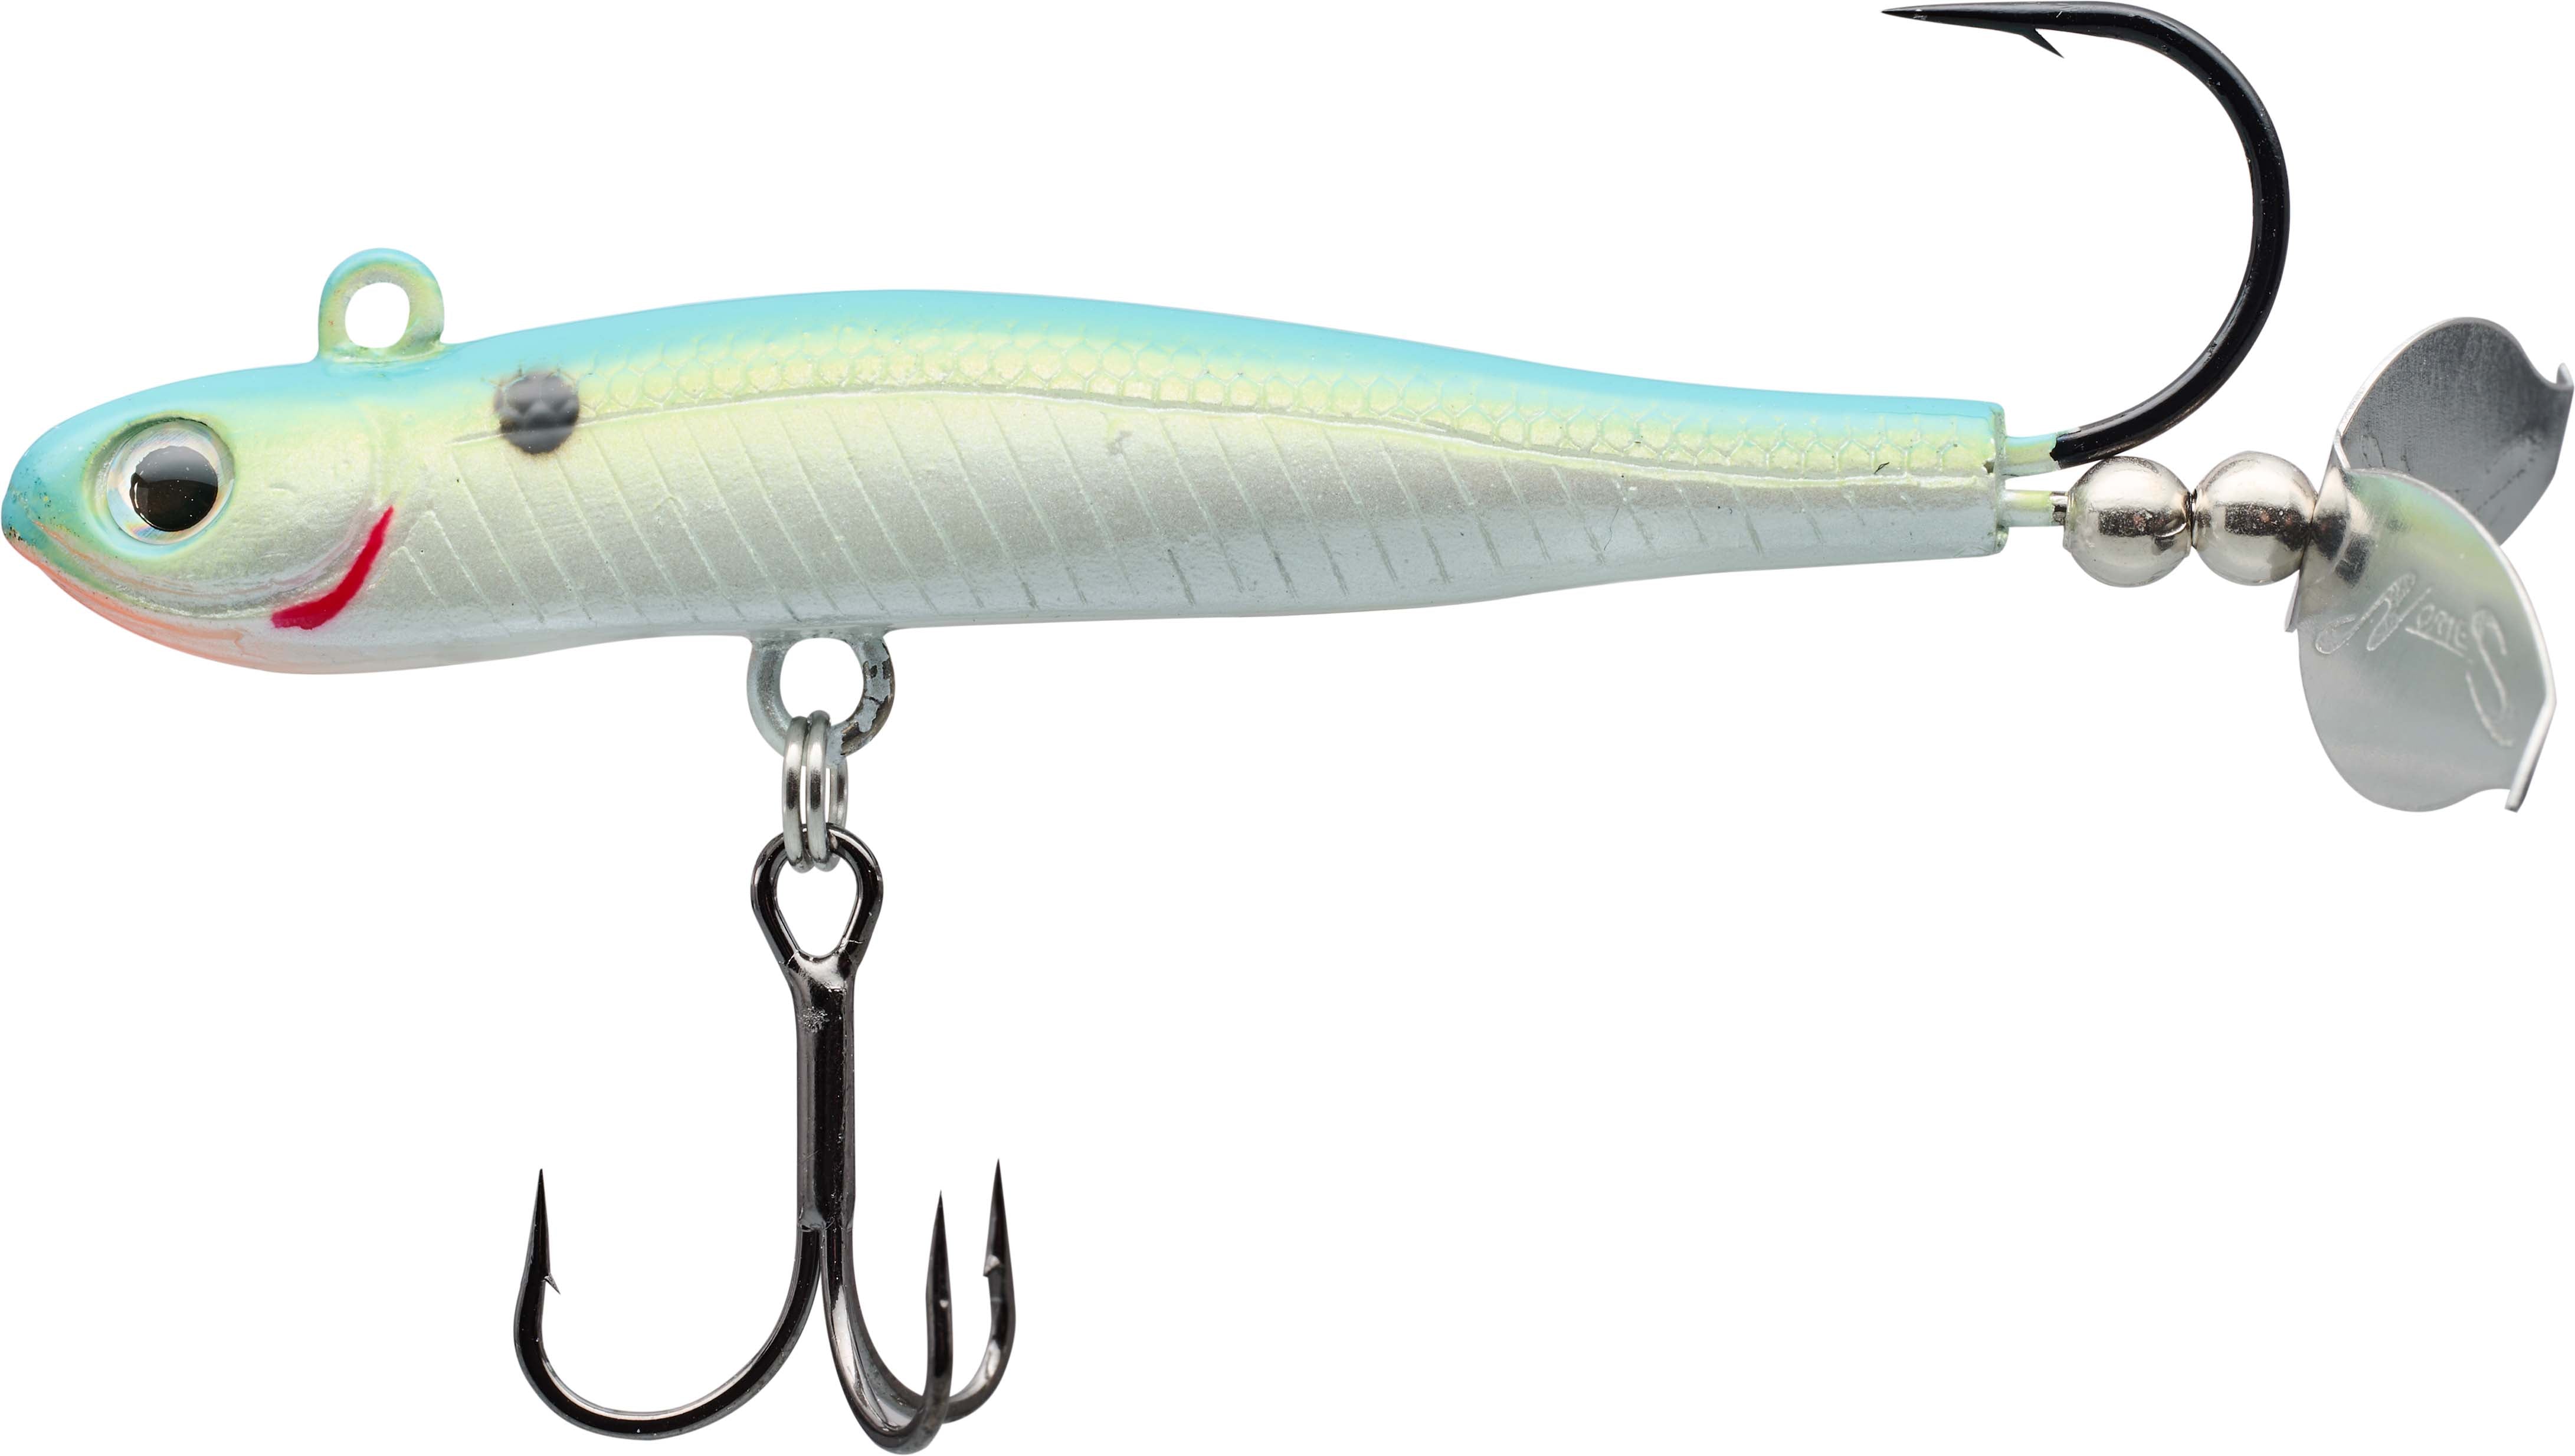 Nories Wrapping Minnow Prop Bait Citrus Shad / 8g